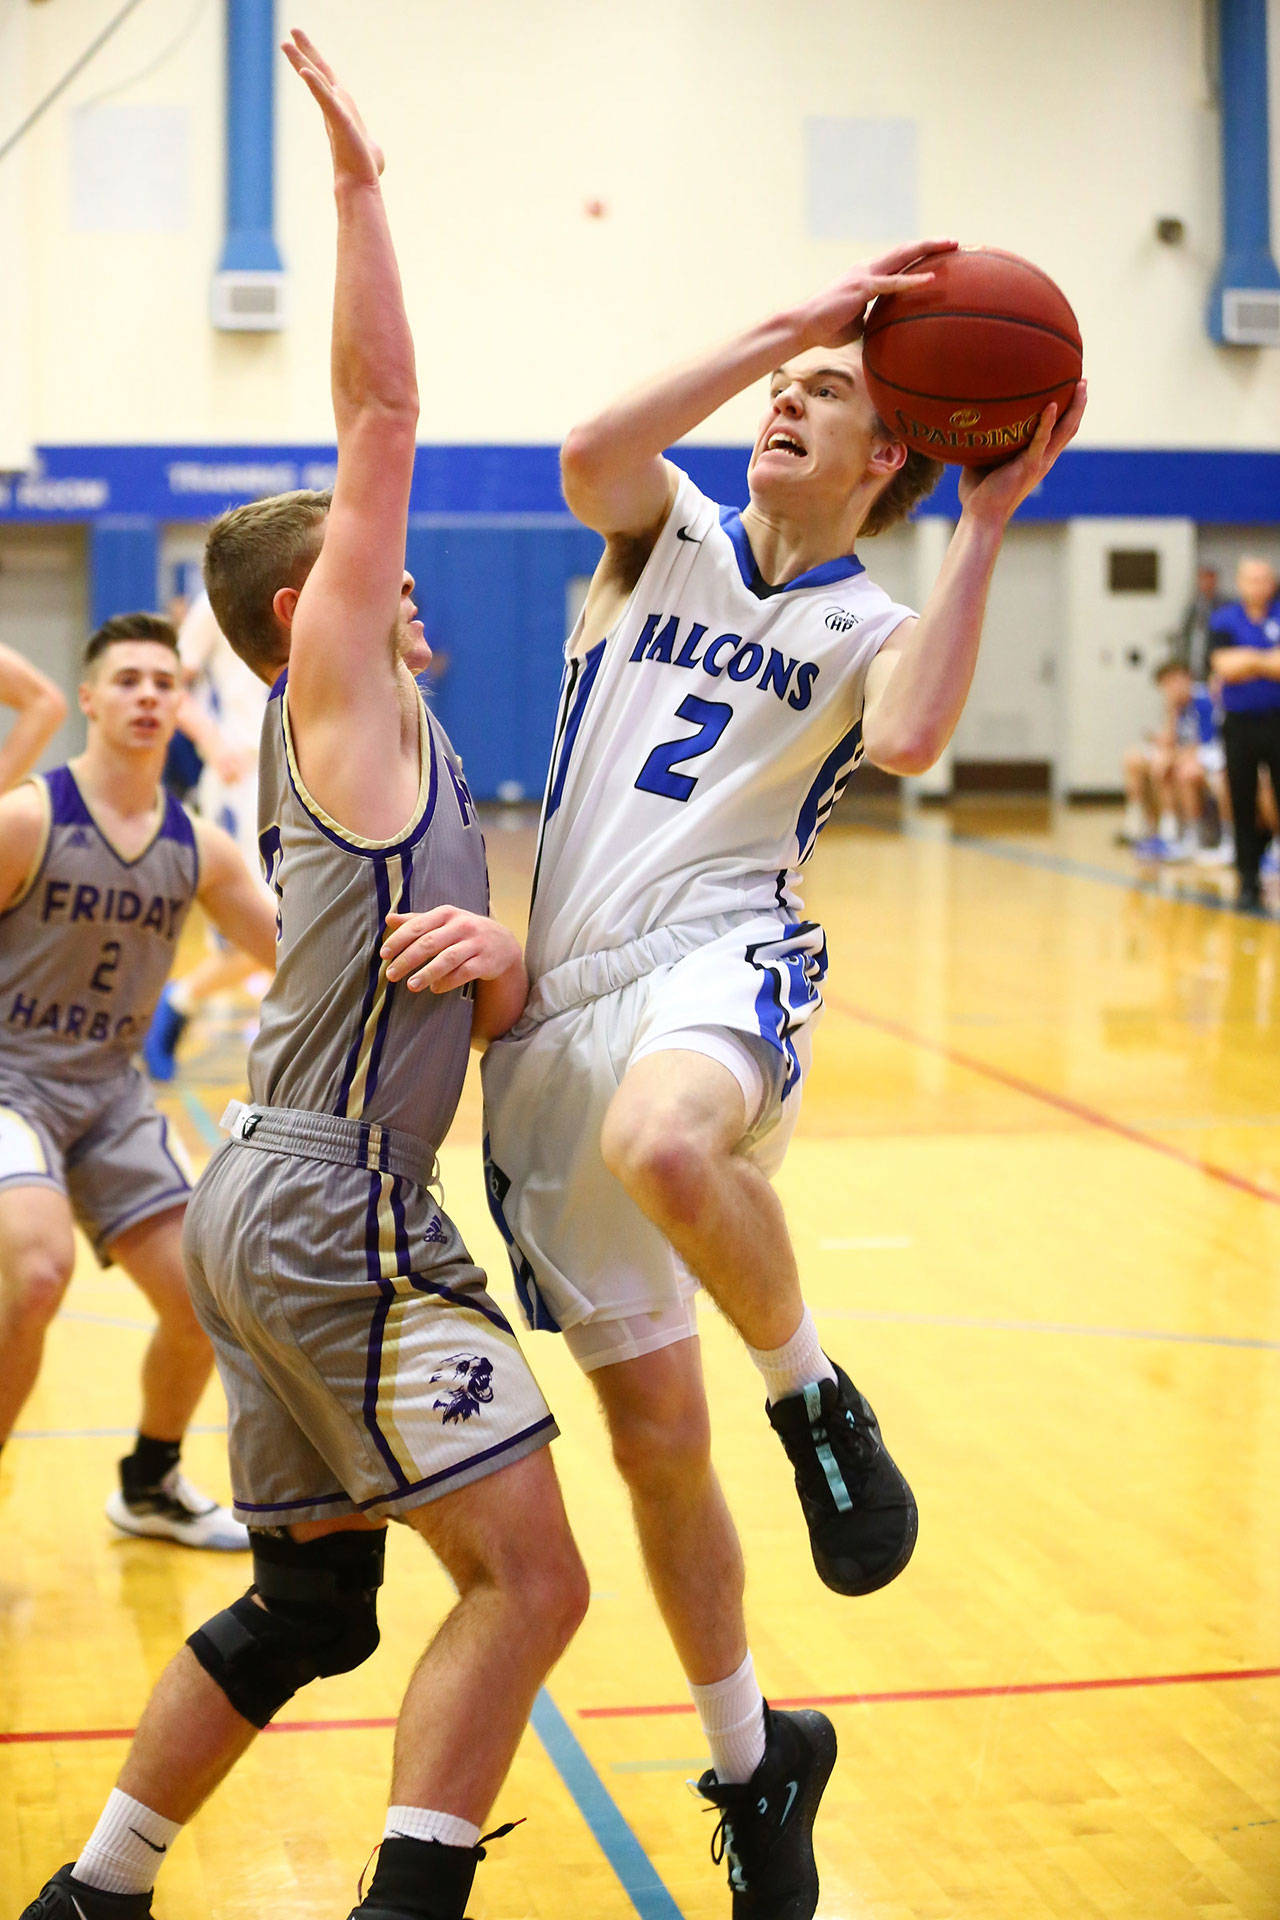 Nick Young attacks the basket for the Falcons.(Photo by John Fisken)